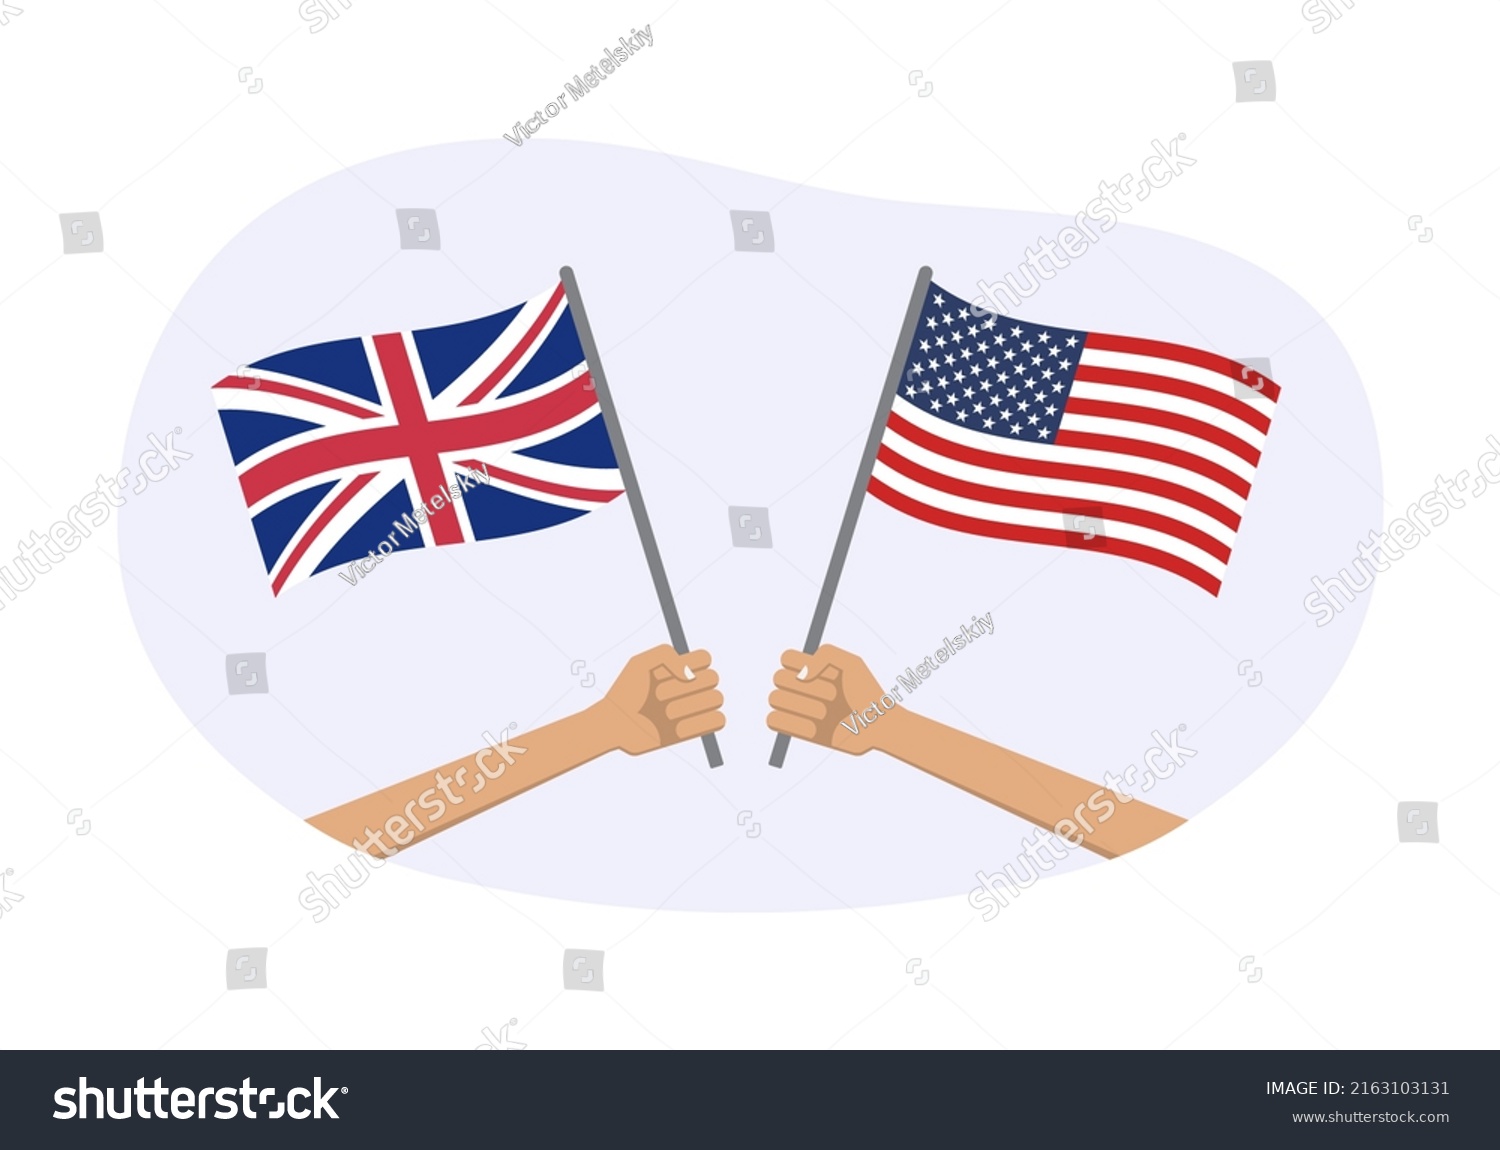 SVG of UK and USA flags. American and British national symbols. Hand holding waving flags. Vector illustration. svg